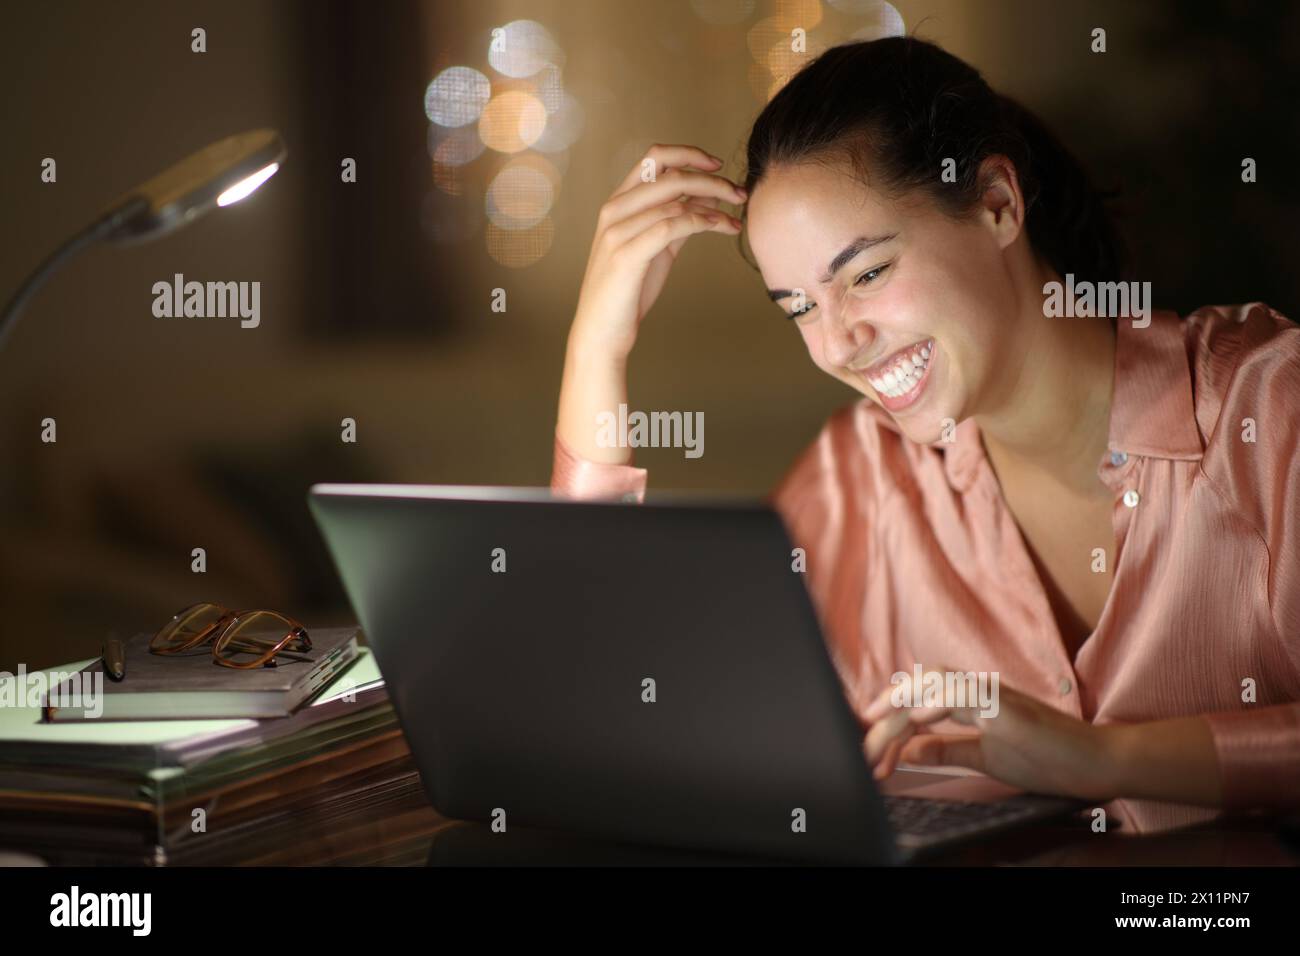 Tele worker in the night laughing checking laptop at home Stock Photo